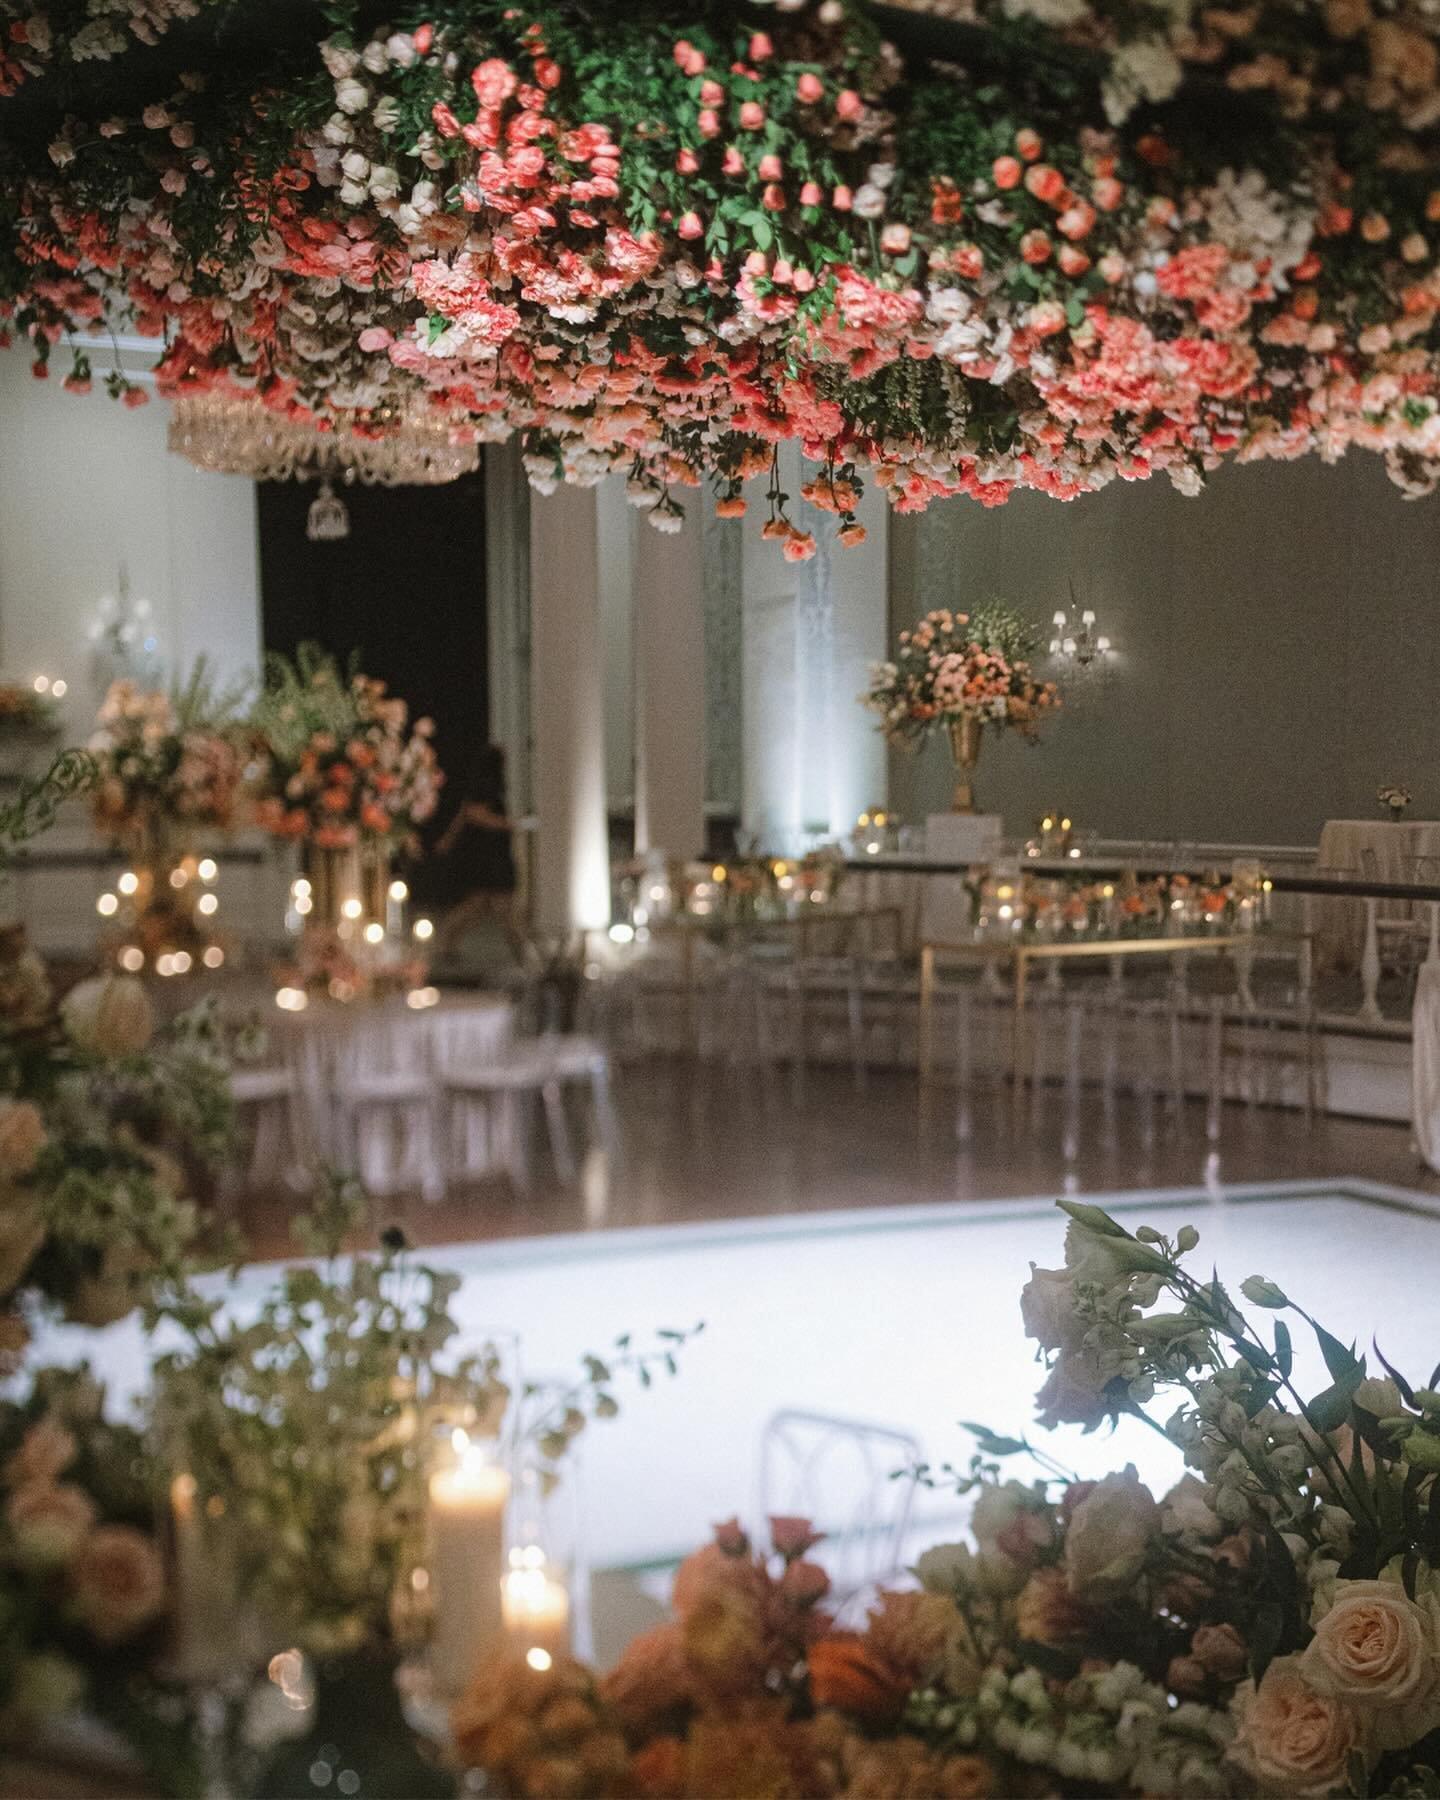 A reception dripping in florals... From floor to ceiling! 🌹⁠
⁠
#JosephWestPhotography ⁠

Planning: @belleevents @meghan_belleevents 
Floral &amp; Decor: @floraeventi 
Lighting: @360avdesign 
Cake: @whomadethecakehouston 
Video: @reverentweddingfilms